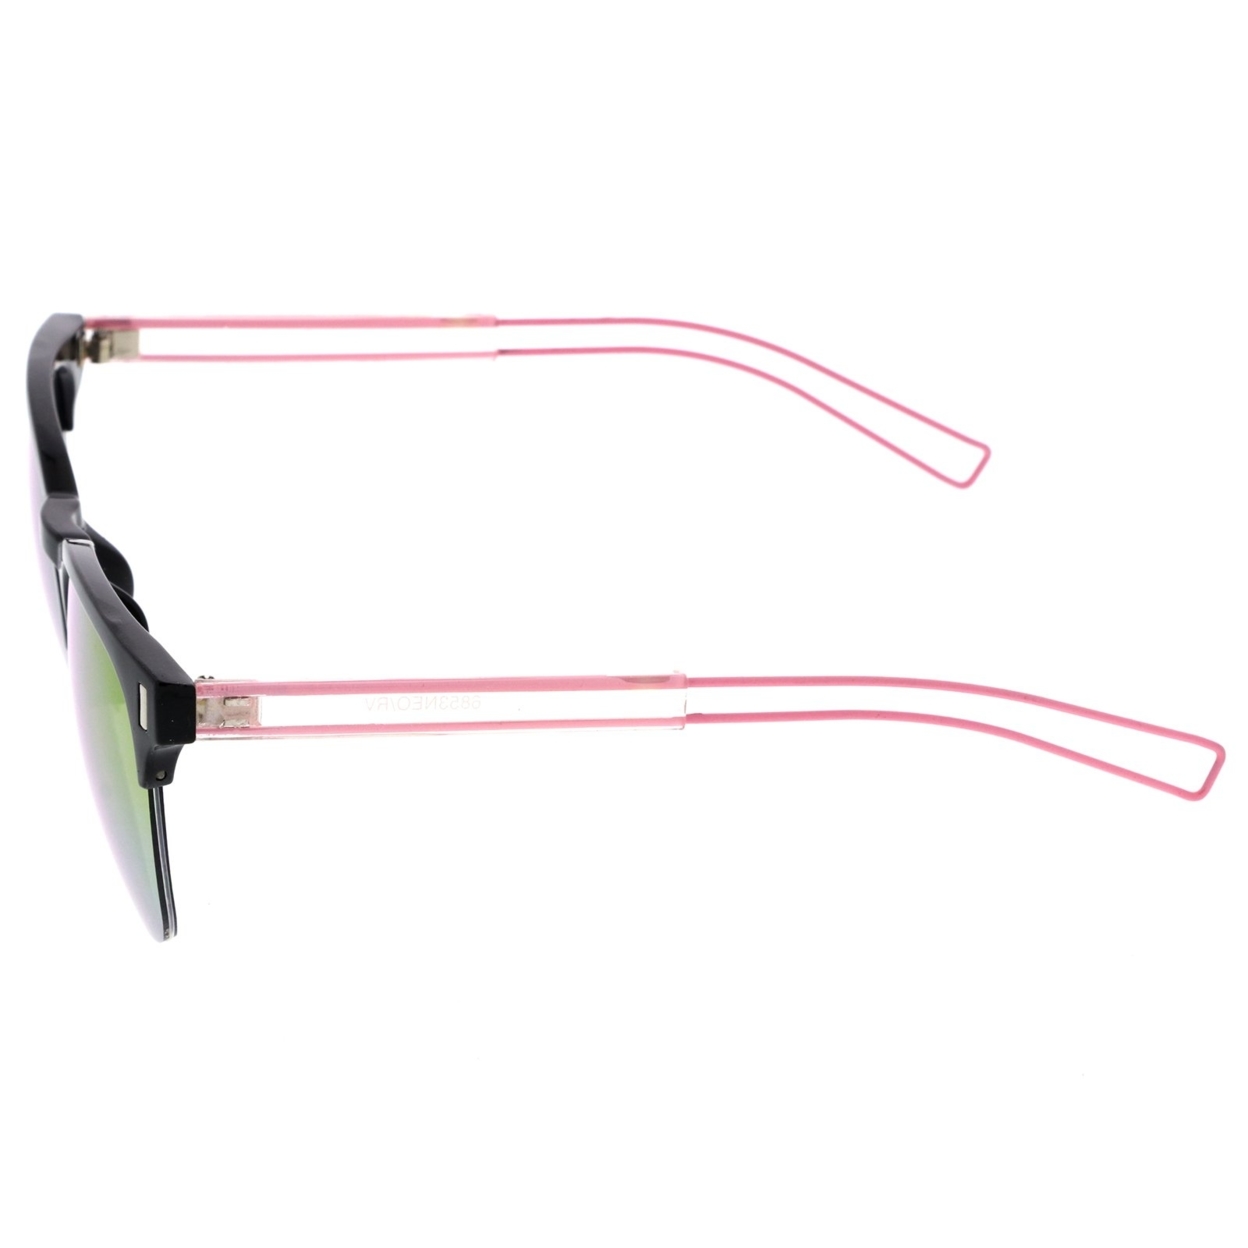 Semi Rimless Wire Hook Temples Square Colored Mirror Lens Horn Rimmed Sunglasses 56mm - Black-Pink / Orange Mirror